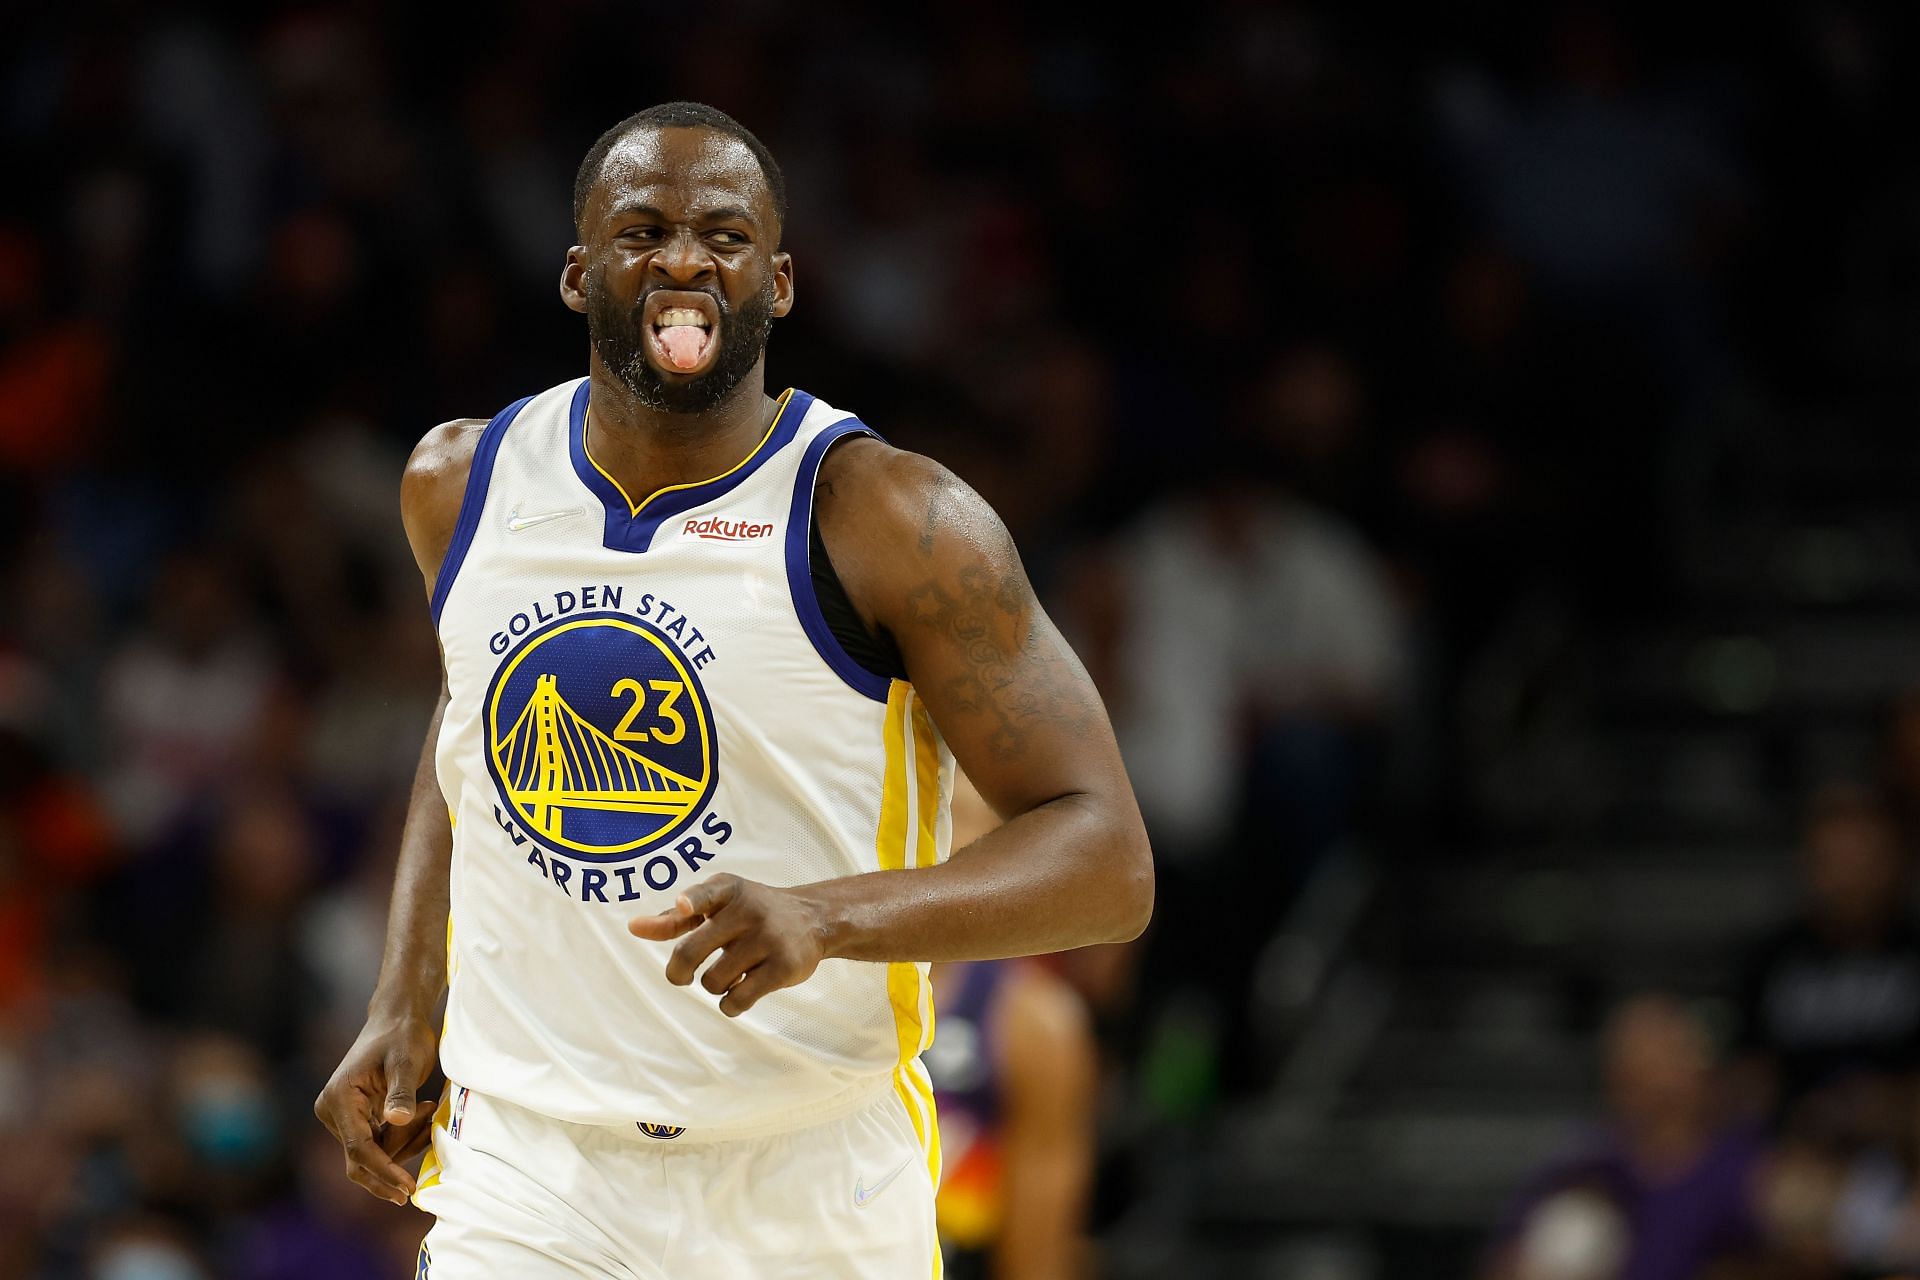 Draymond Green #23 of the Golden State Warriors reacts after a three-point shot against the Phoenix Suns during the second half of NBA game at Footprint Center on December 25, 2021 in Phoenix, Arizona.